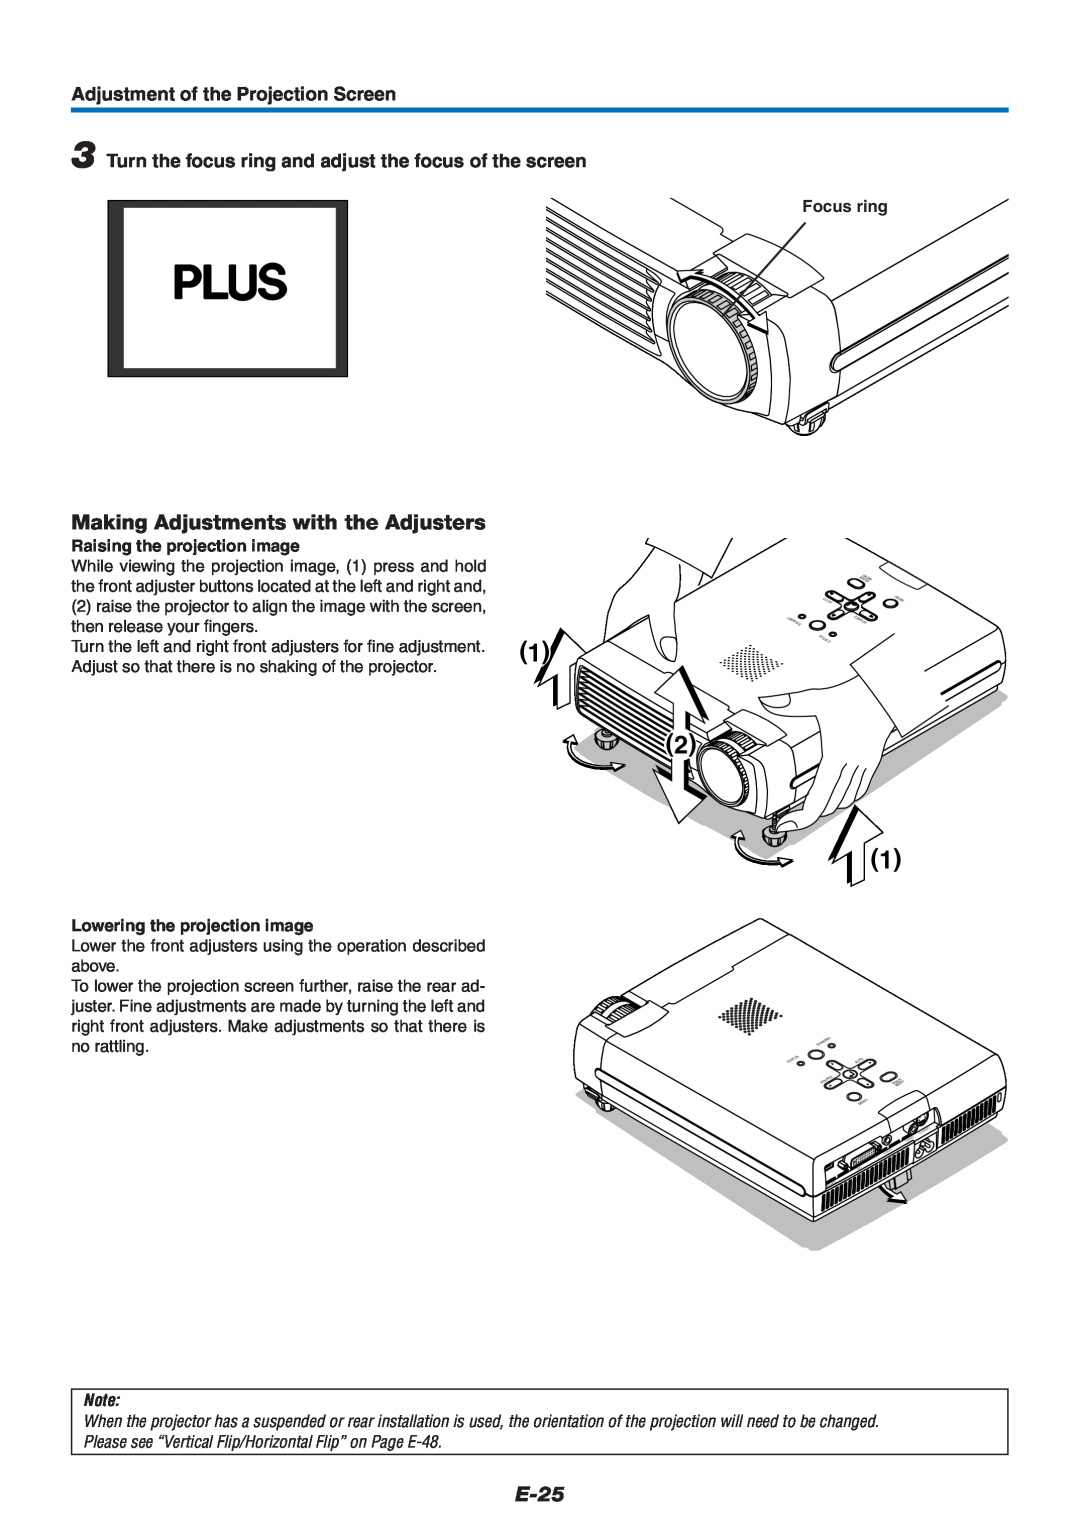 PLUS Vision U4-232 user manual Making Adjustments with the Adjusters, E-25, Adjustment of the Projection Screen, Focus ring 